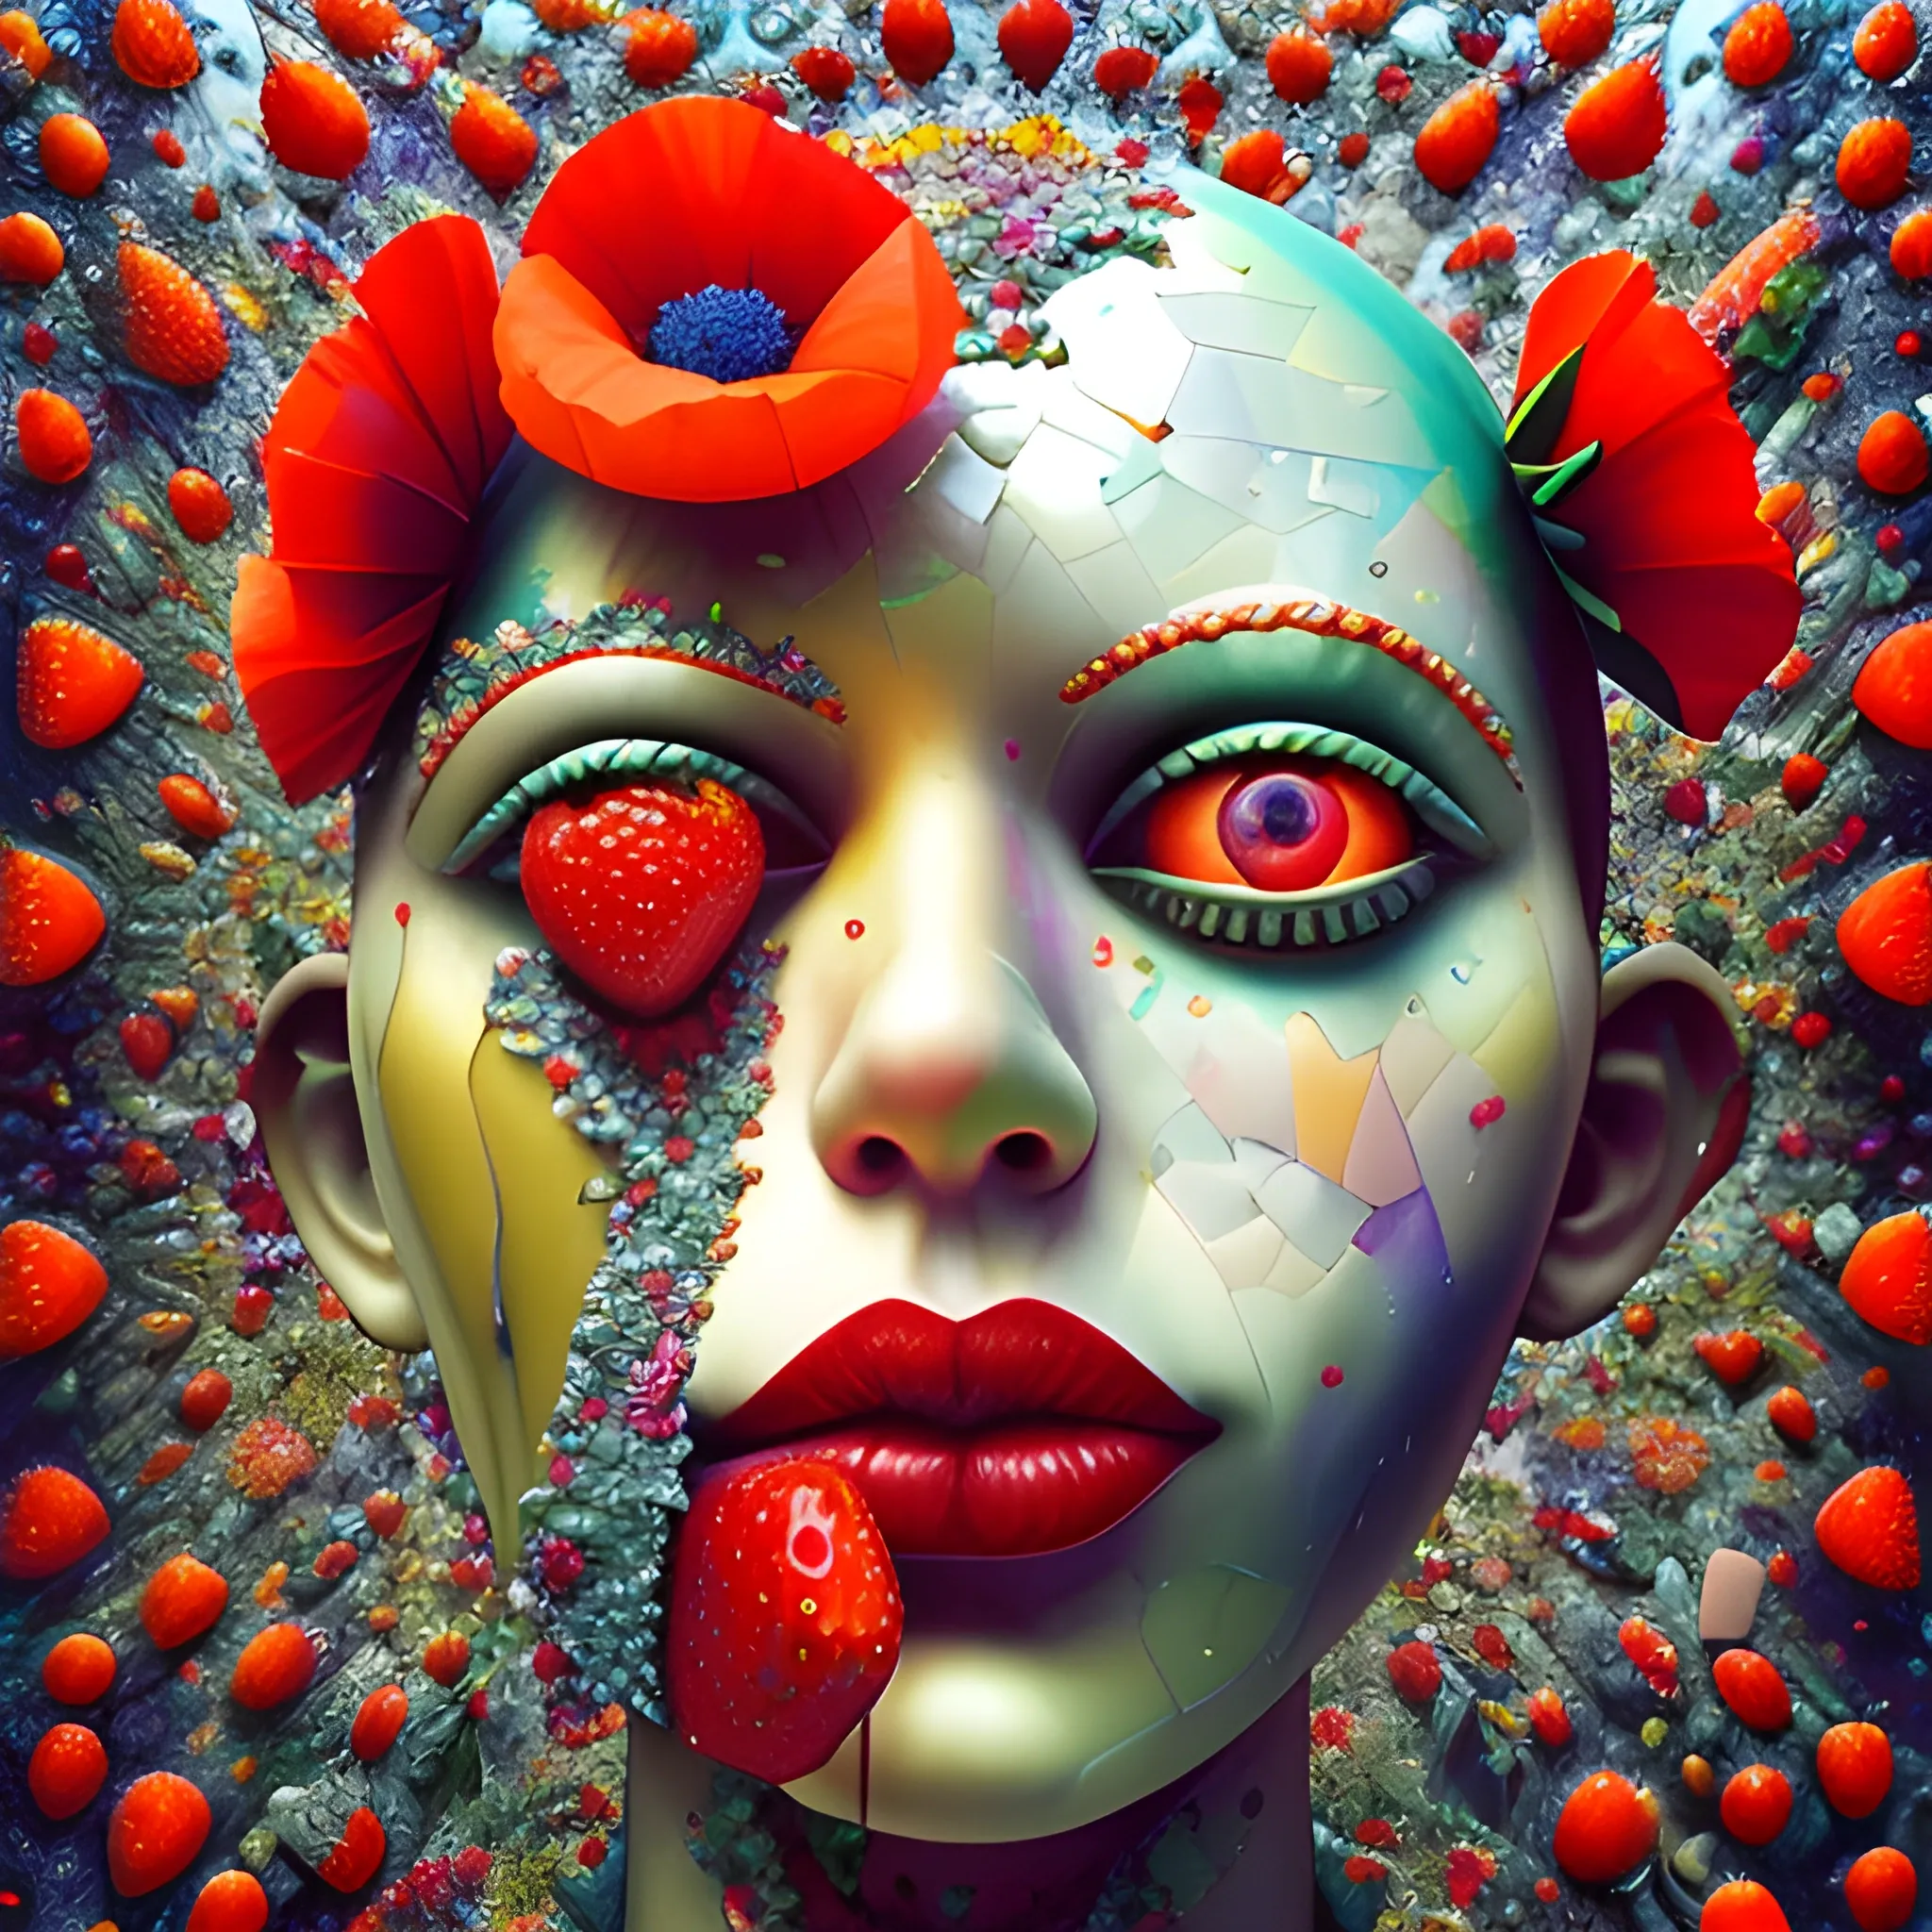 make a sculpture of many crystal crazy strawberries with human face, poppies around, many broken glass in the air, saturated colors
surrealism, chaotic background, 3D, Trippy,  eerie atmosphere, close up, Oil Painting, aerial perspective